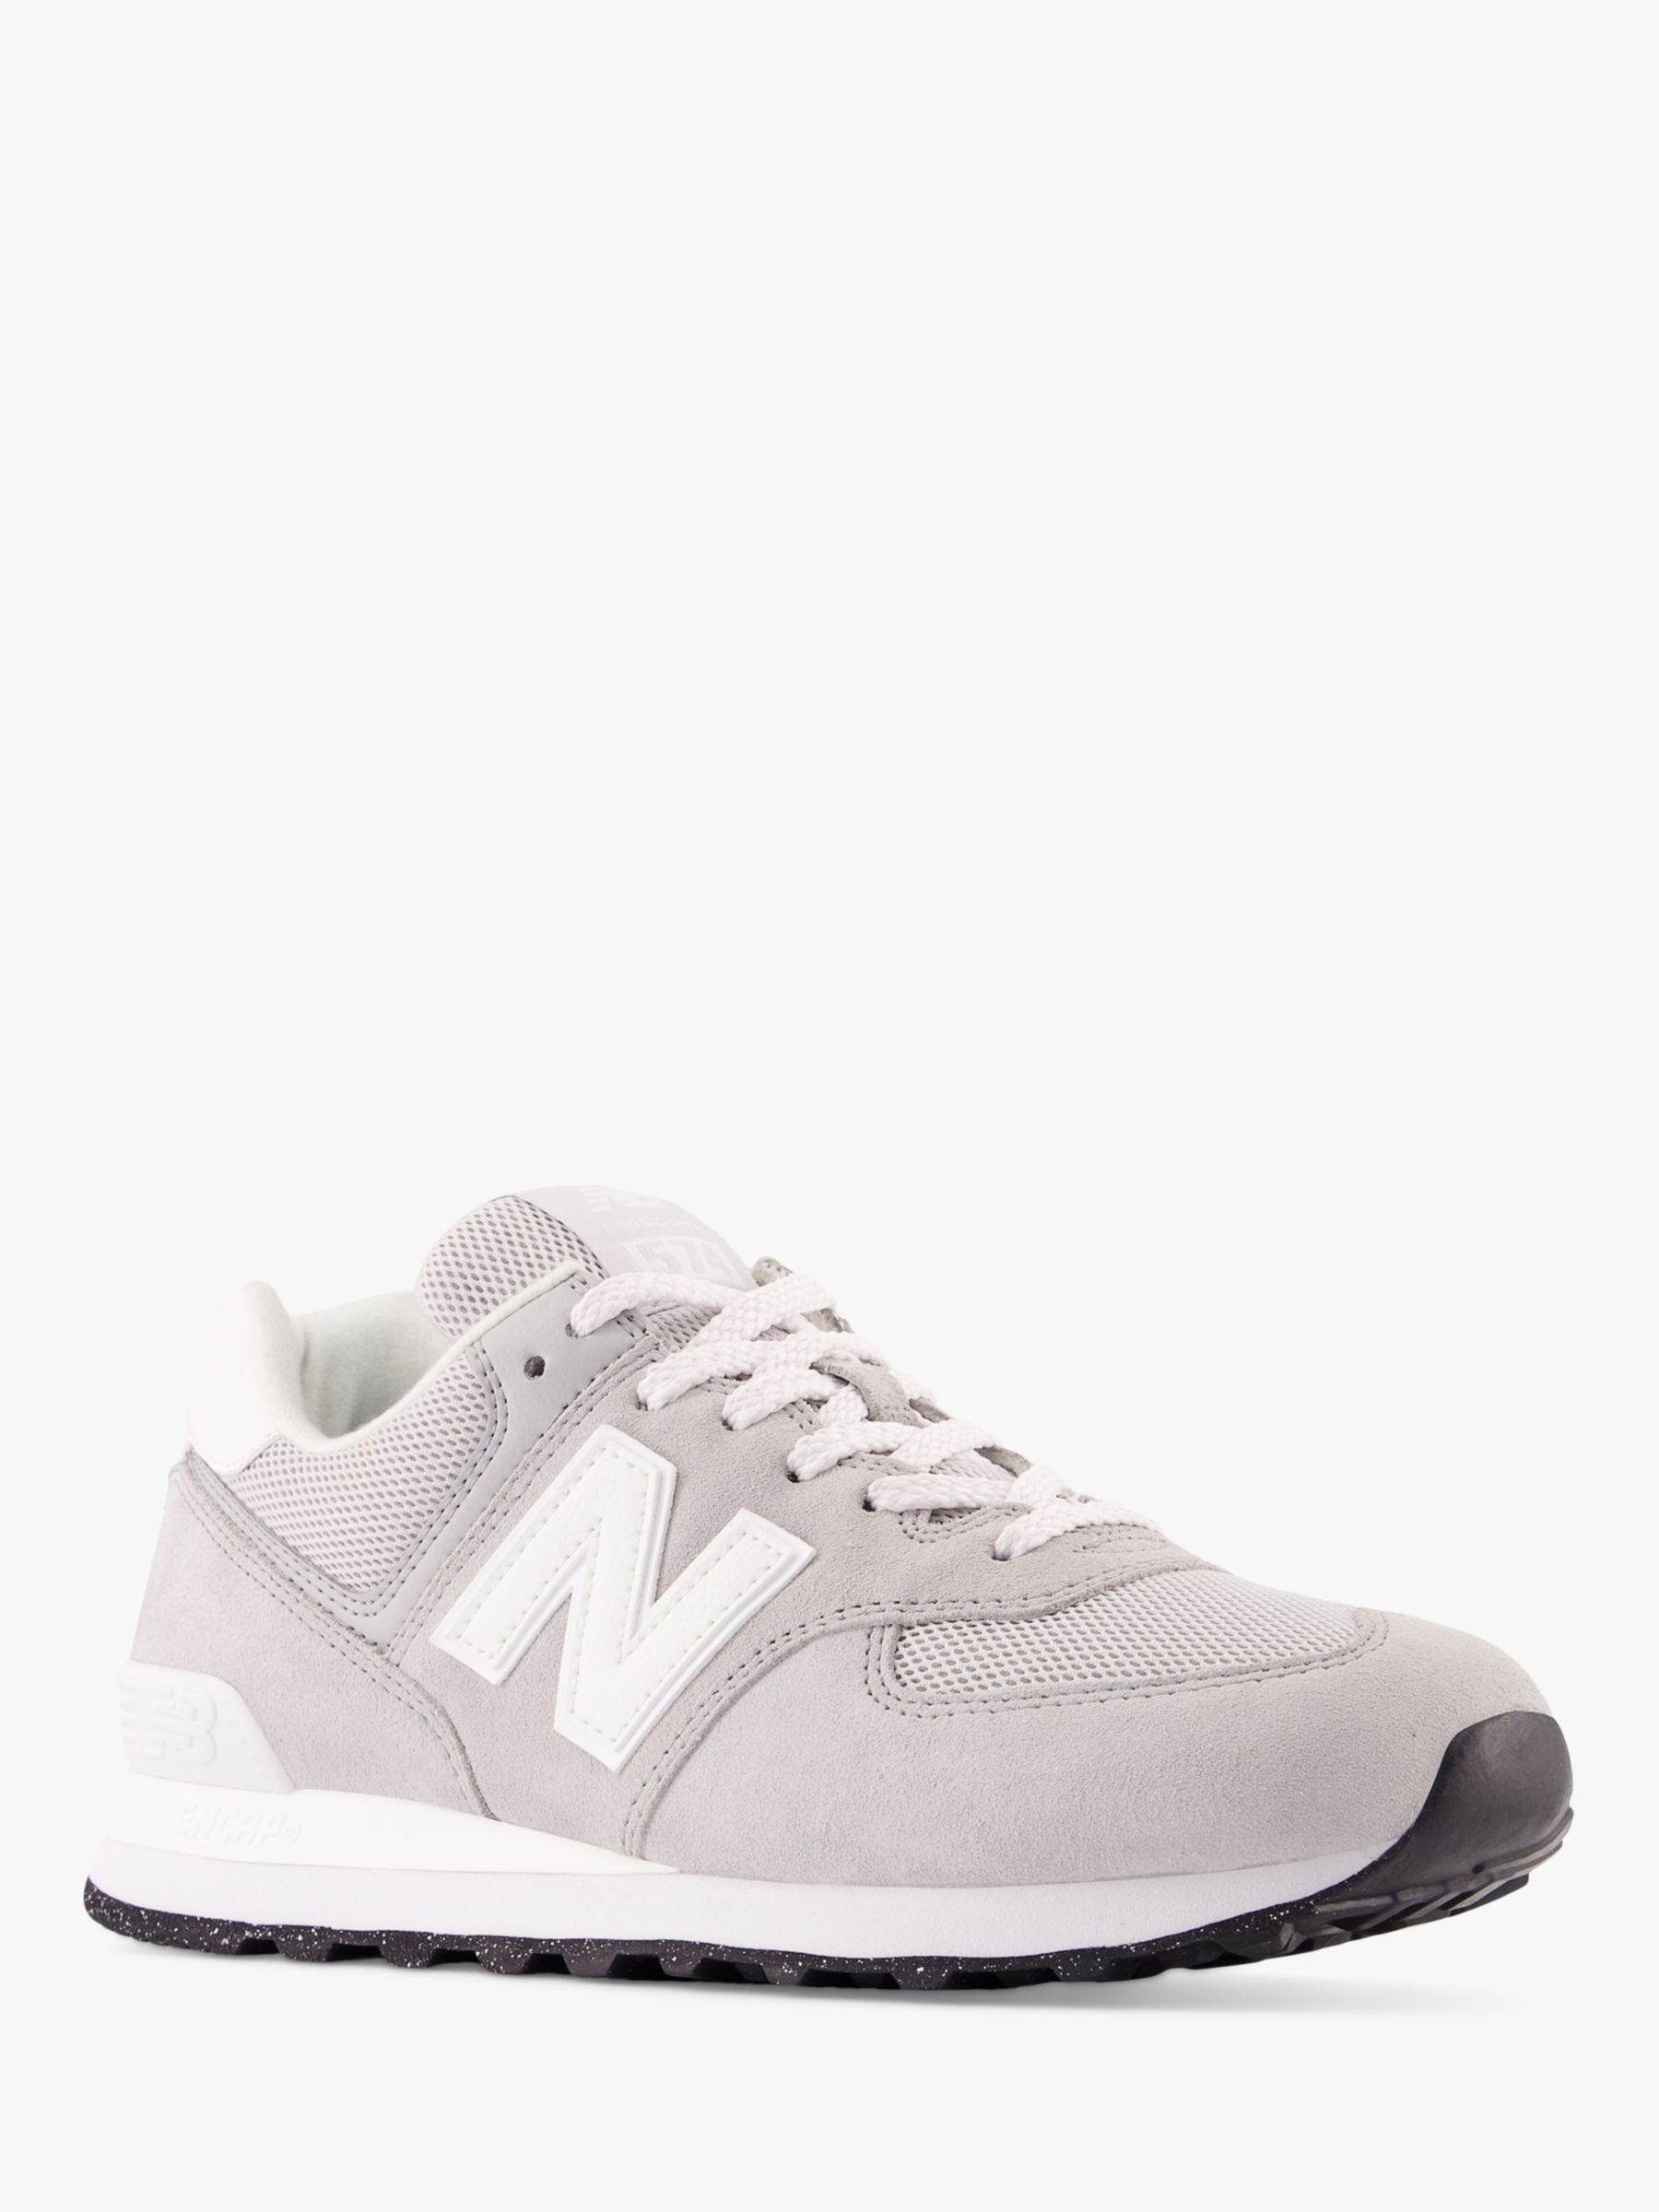 New Balance 574 Suede Mesh Trainers, Grey, 5